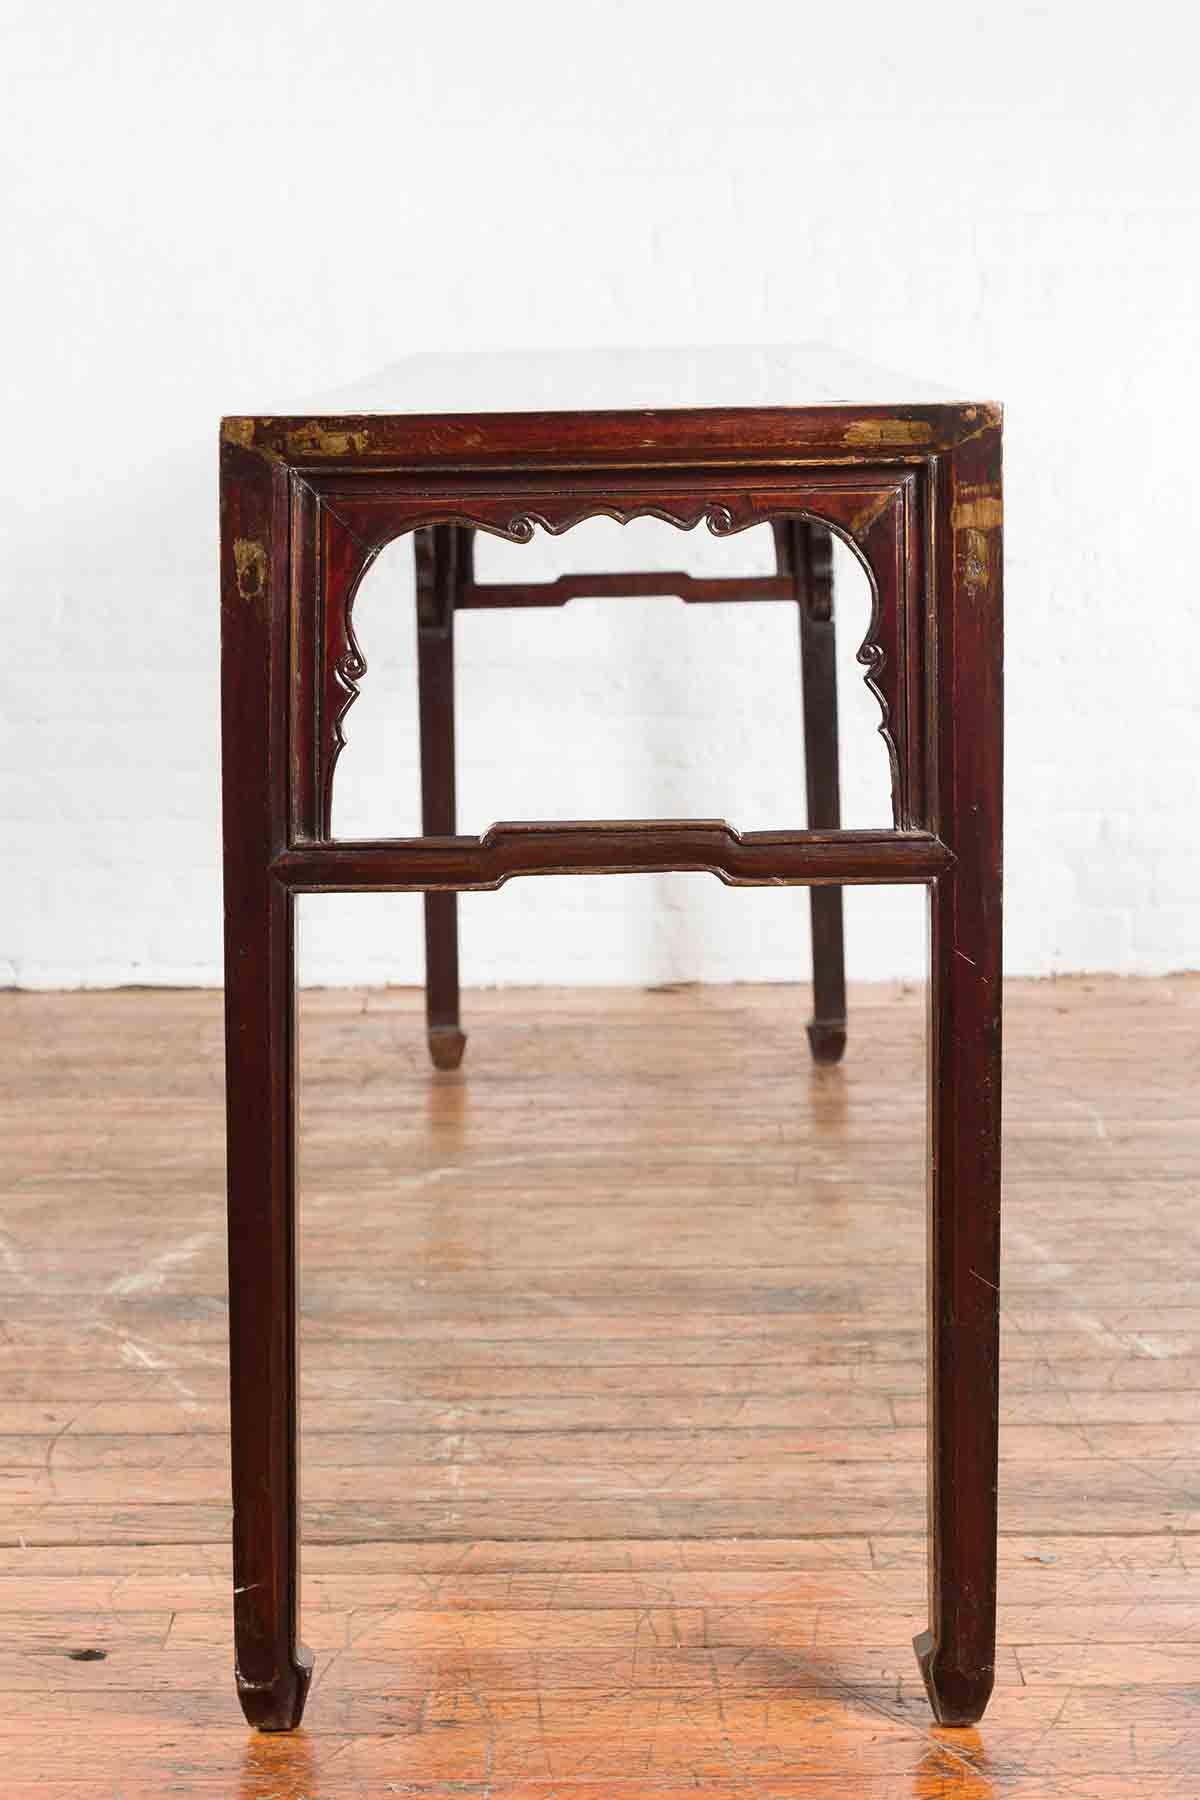 Chinese 19th Century Qing Dynasty Altar Console Table with Reddish Brown Patina For Sale 2